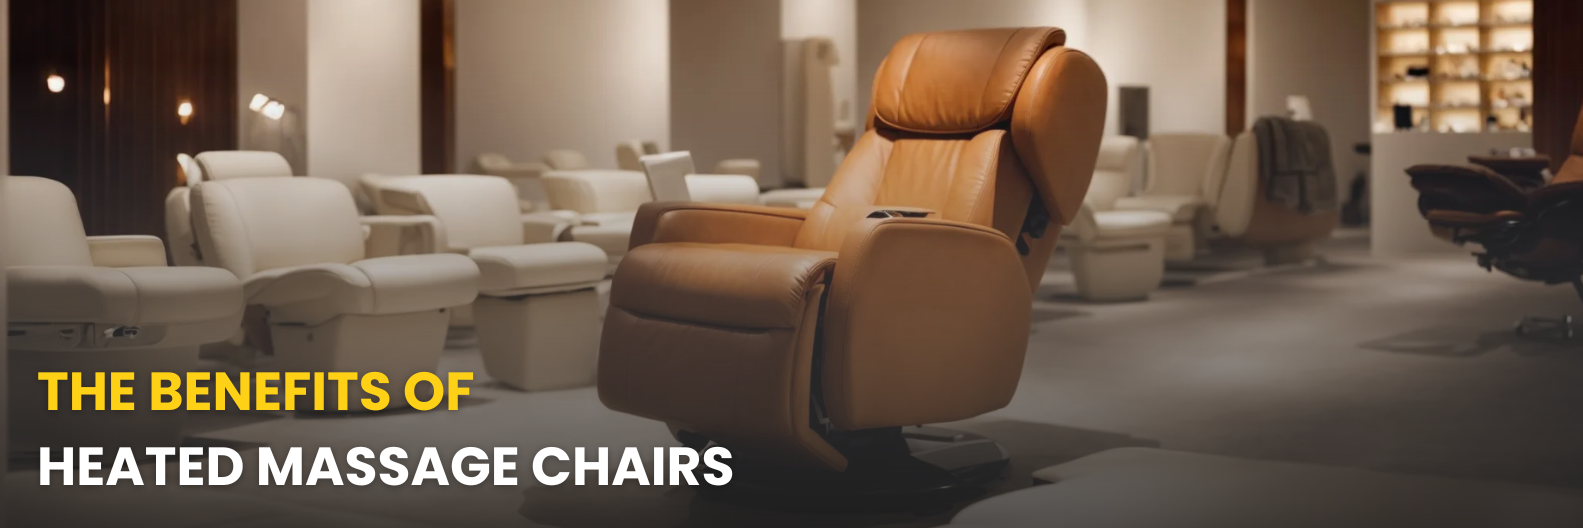 The latest massage chairs features include zero gravity recline, full body stretch, and heat therapy, revolutionizing the way we relax at home. 